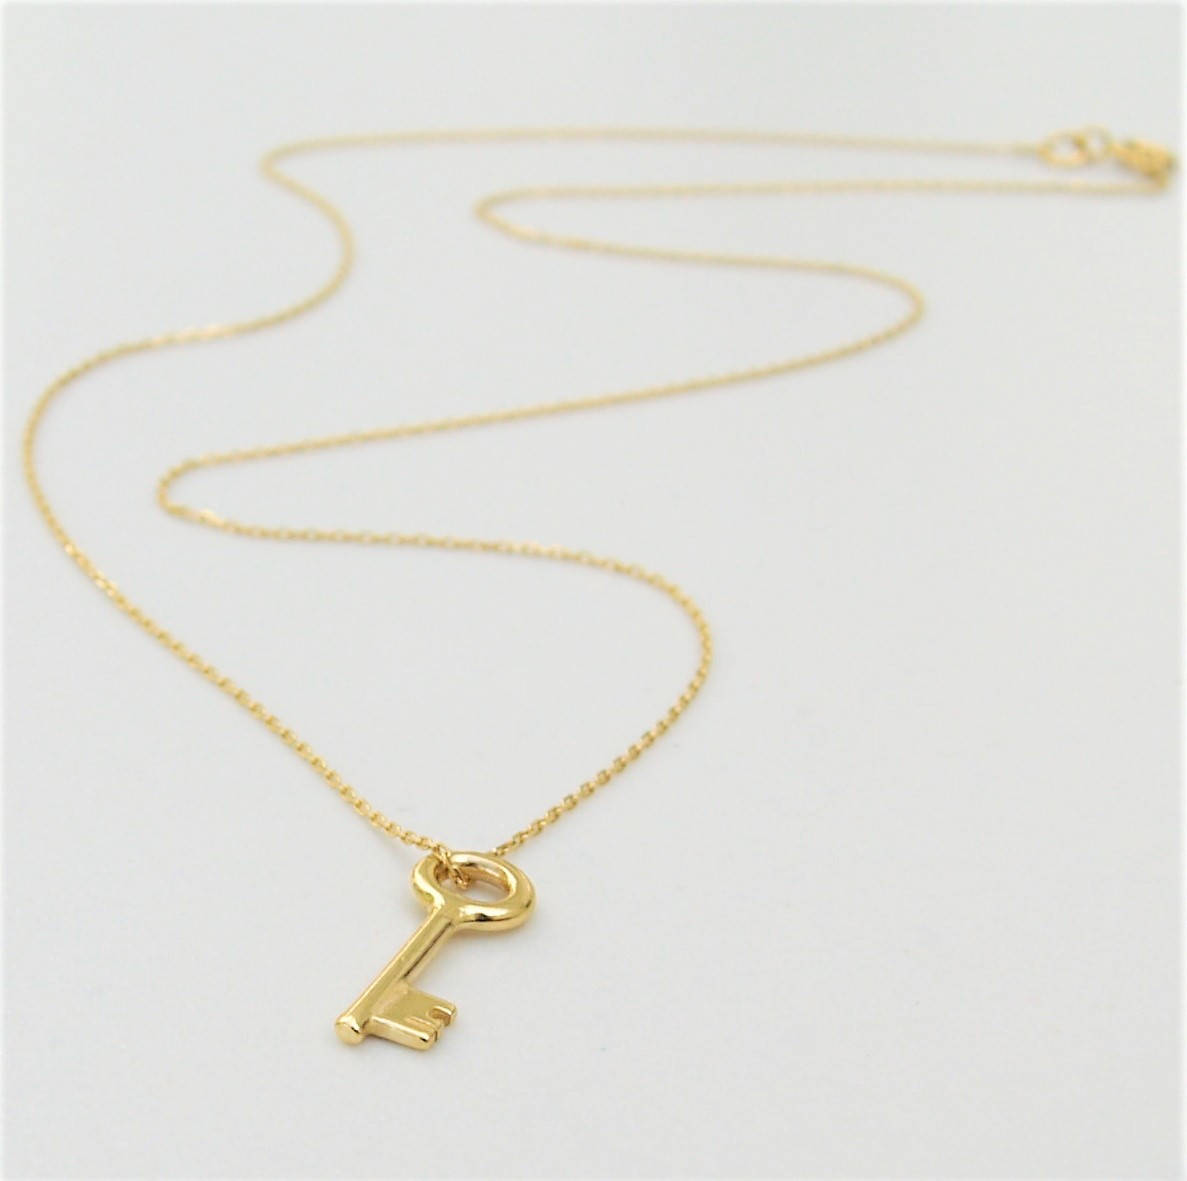 Handmade to order - 18ct solid yellow gold small and dainty key charm pendant and chain